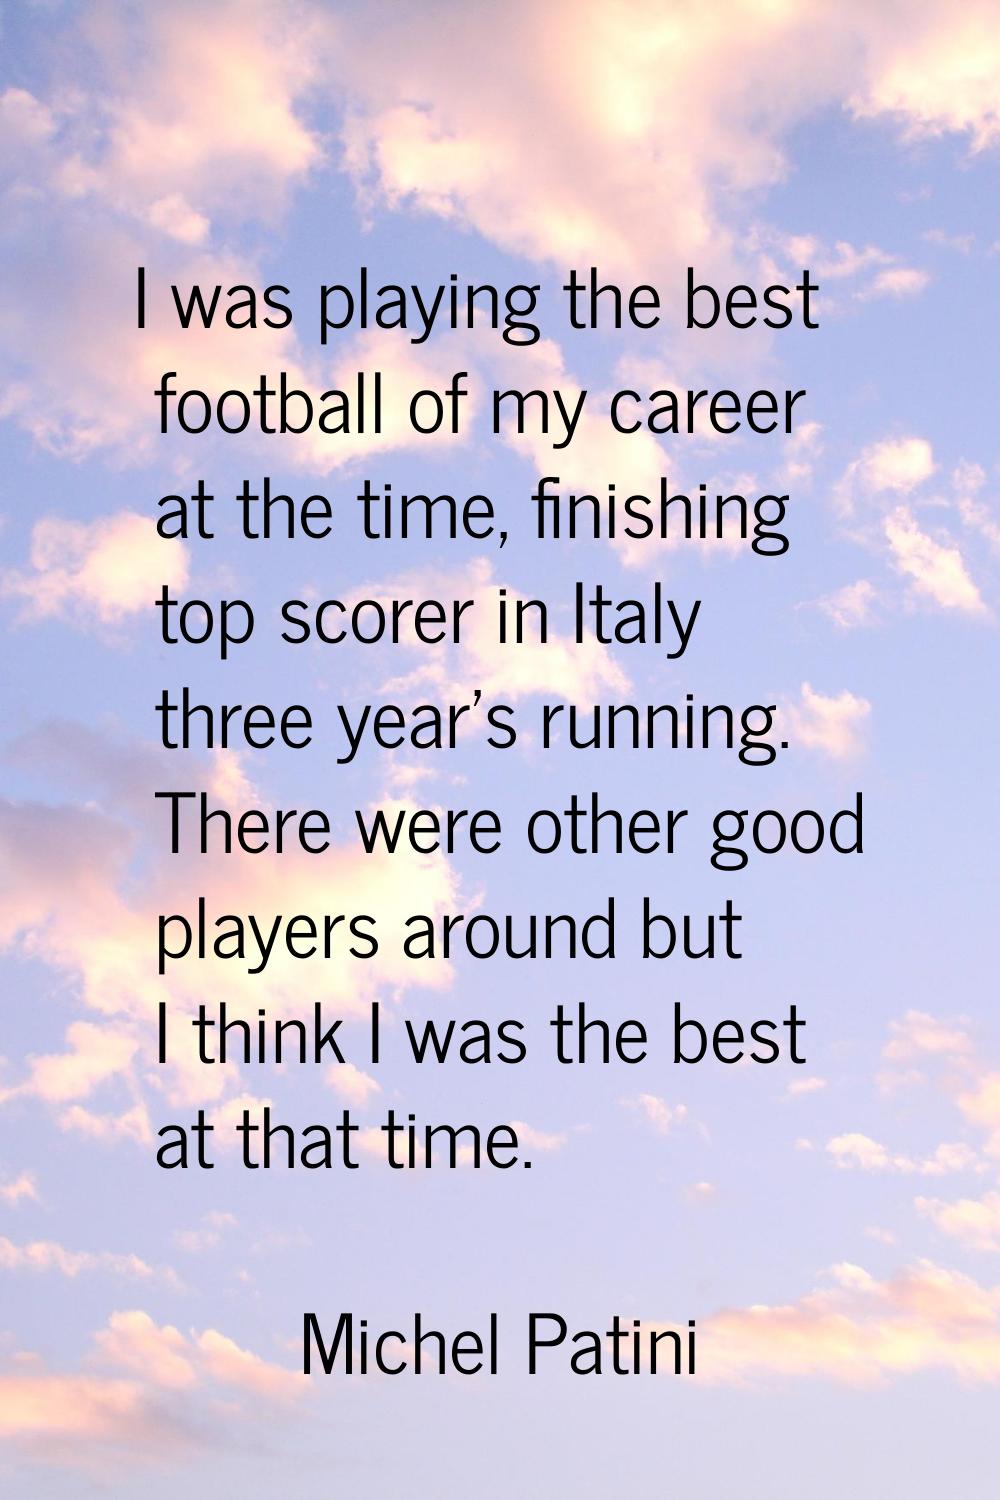 I was playing the best football of my career at the time, finishing top scorer in Italy three year'